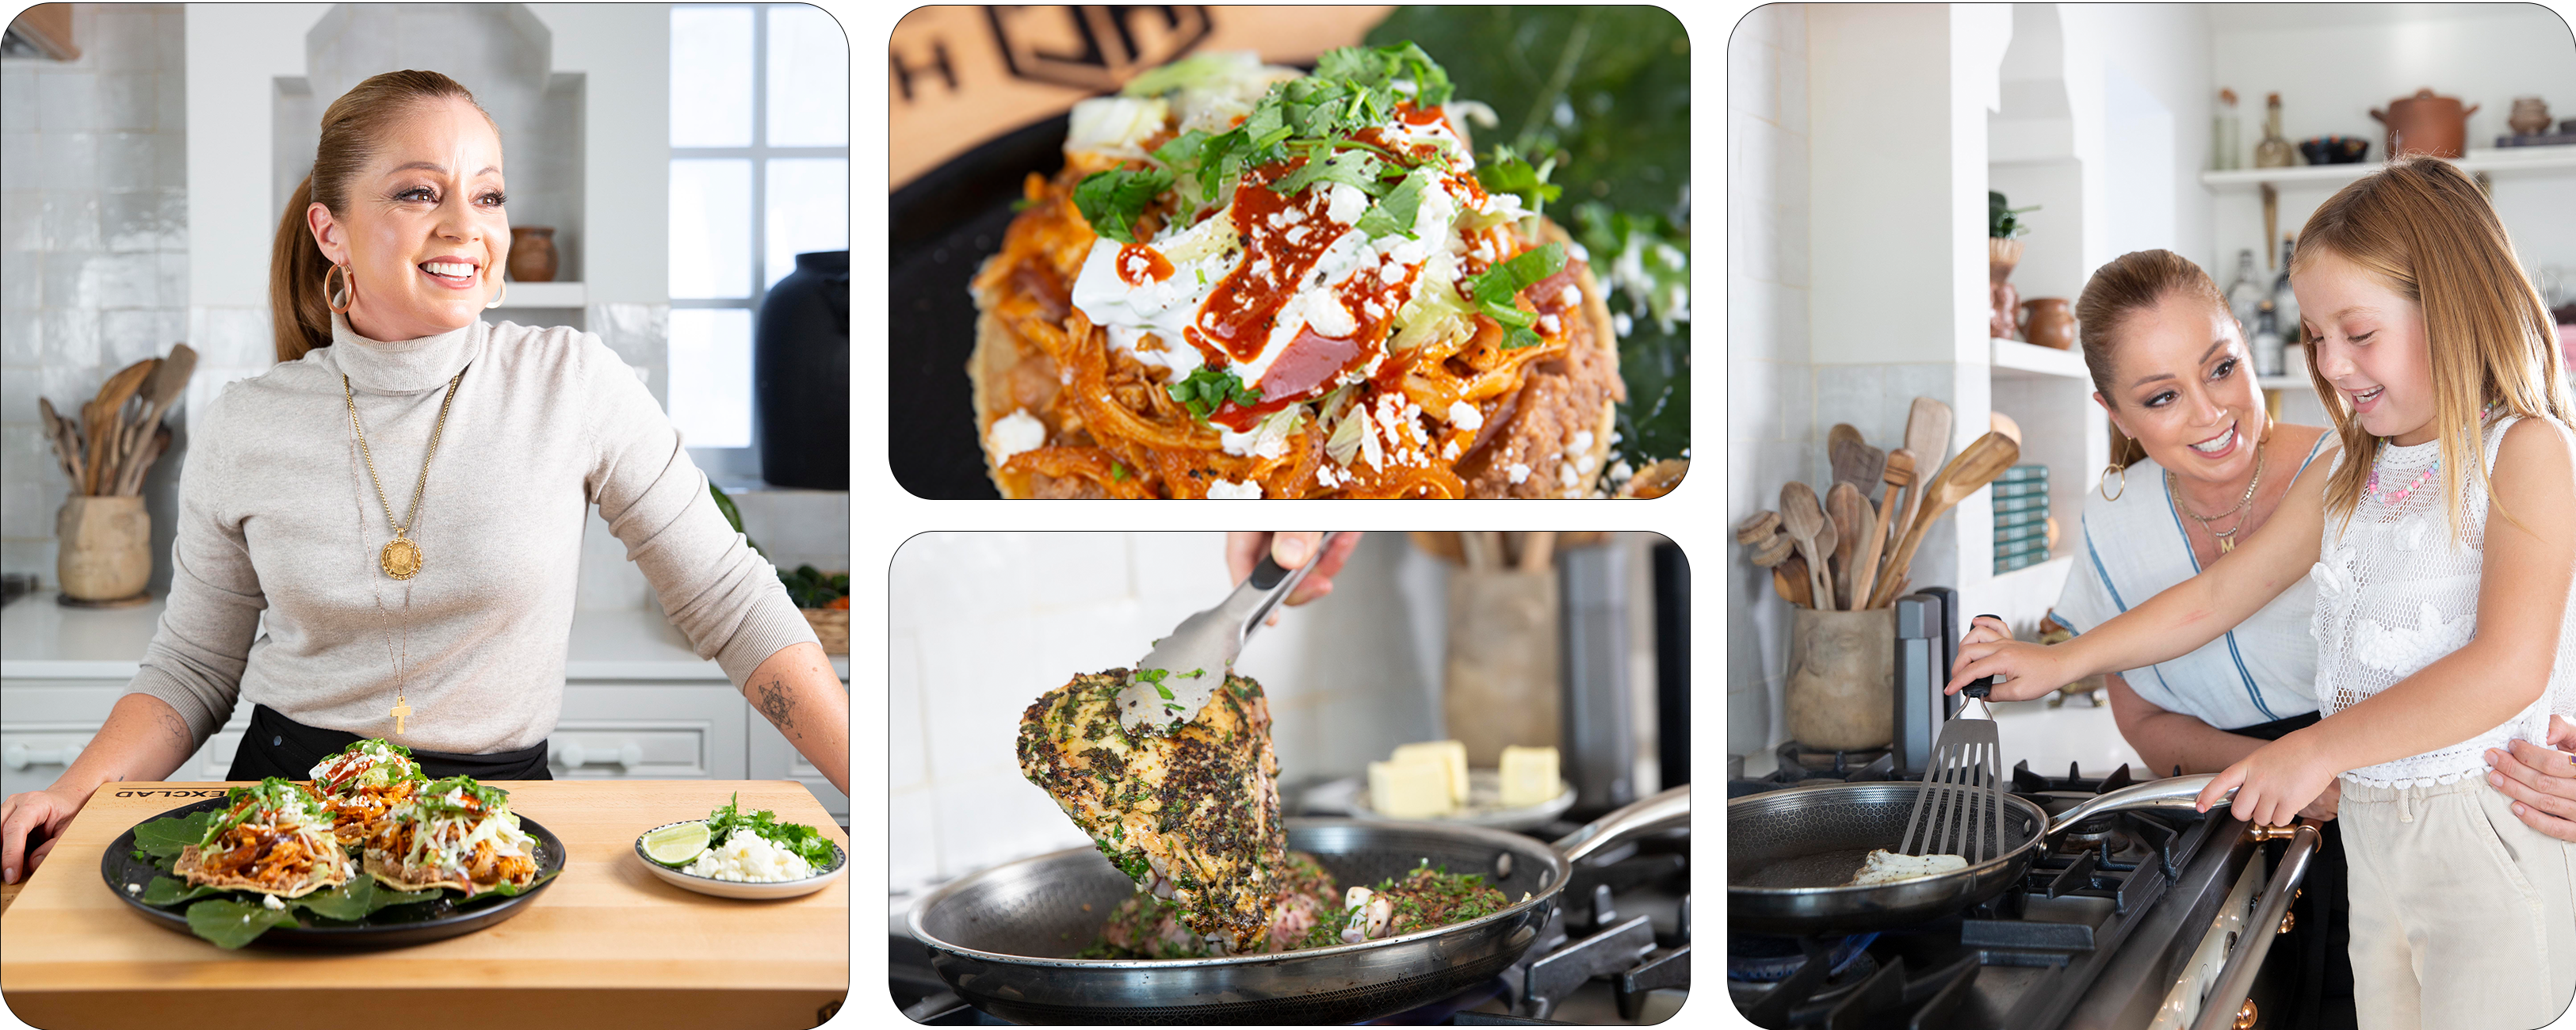 A collage featuring Chef Marcela in a kitchen environment: Left - She stands proudly by a plate of food; Top right - Close-up of a garnished dish; Bottom right - Chef Marcela guiding a young girl in cooking, both smiling and enjoying the experience.